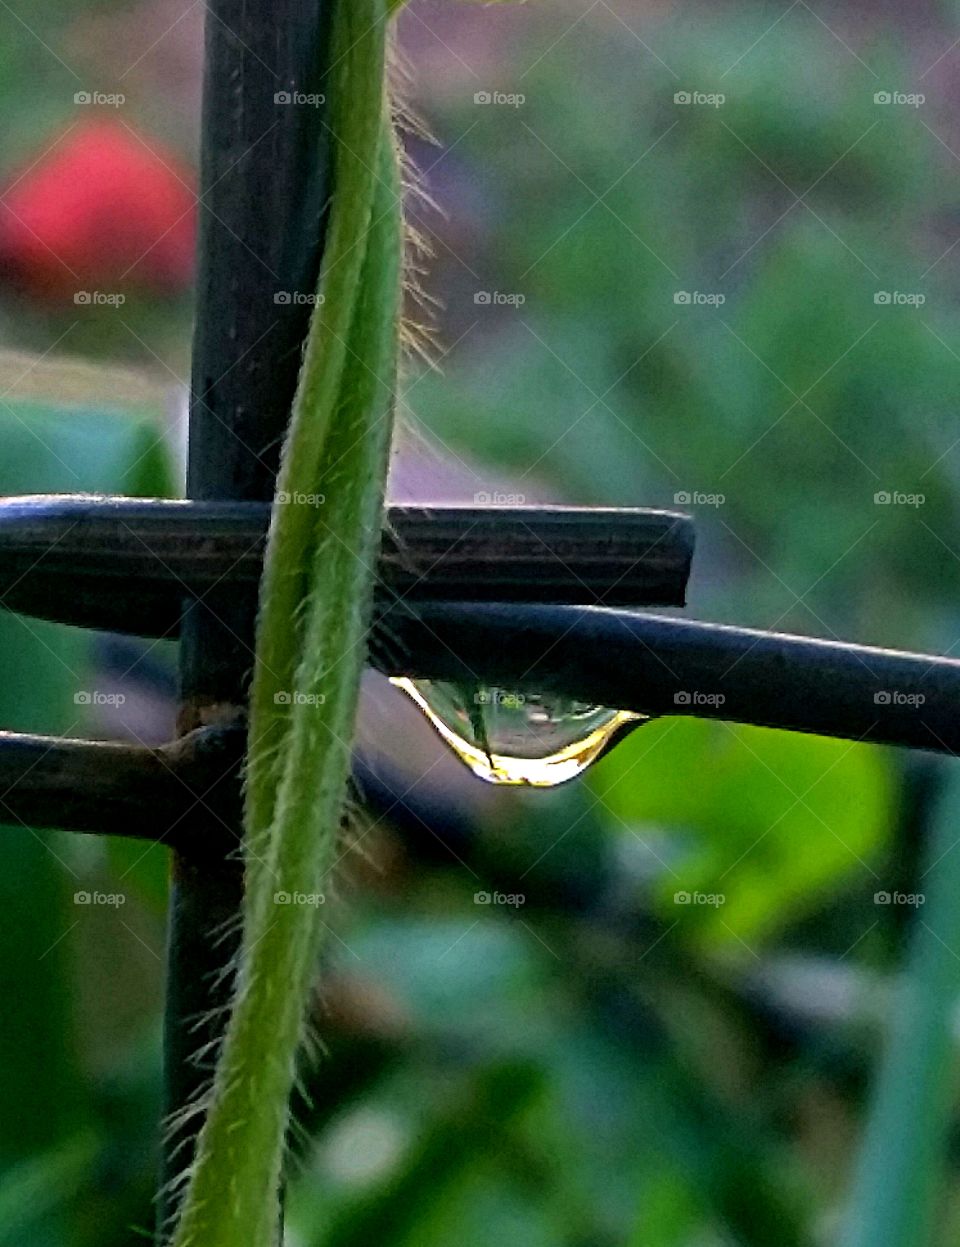 reflection. water droplet in my garden